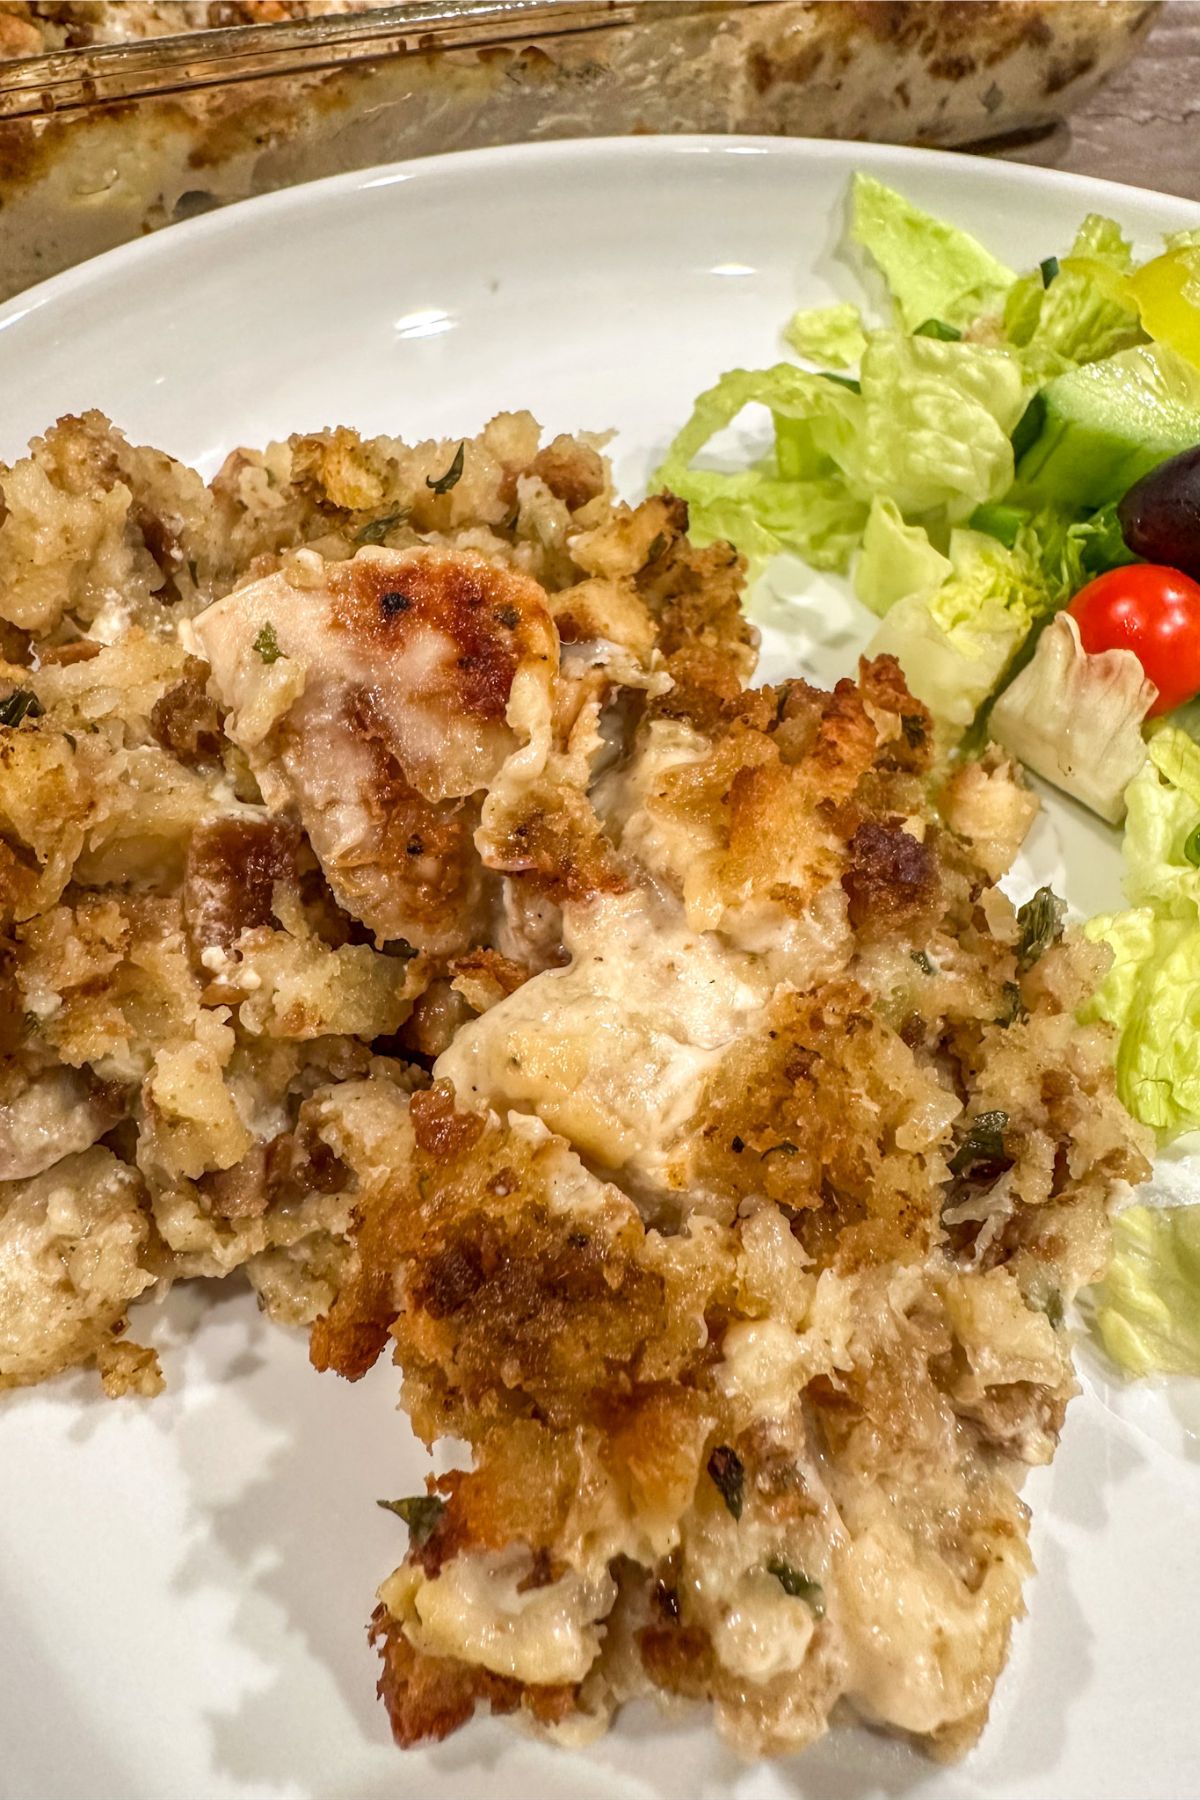 Rotisserie Chicken and Stuffing Casserole served on a dish with a salad.